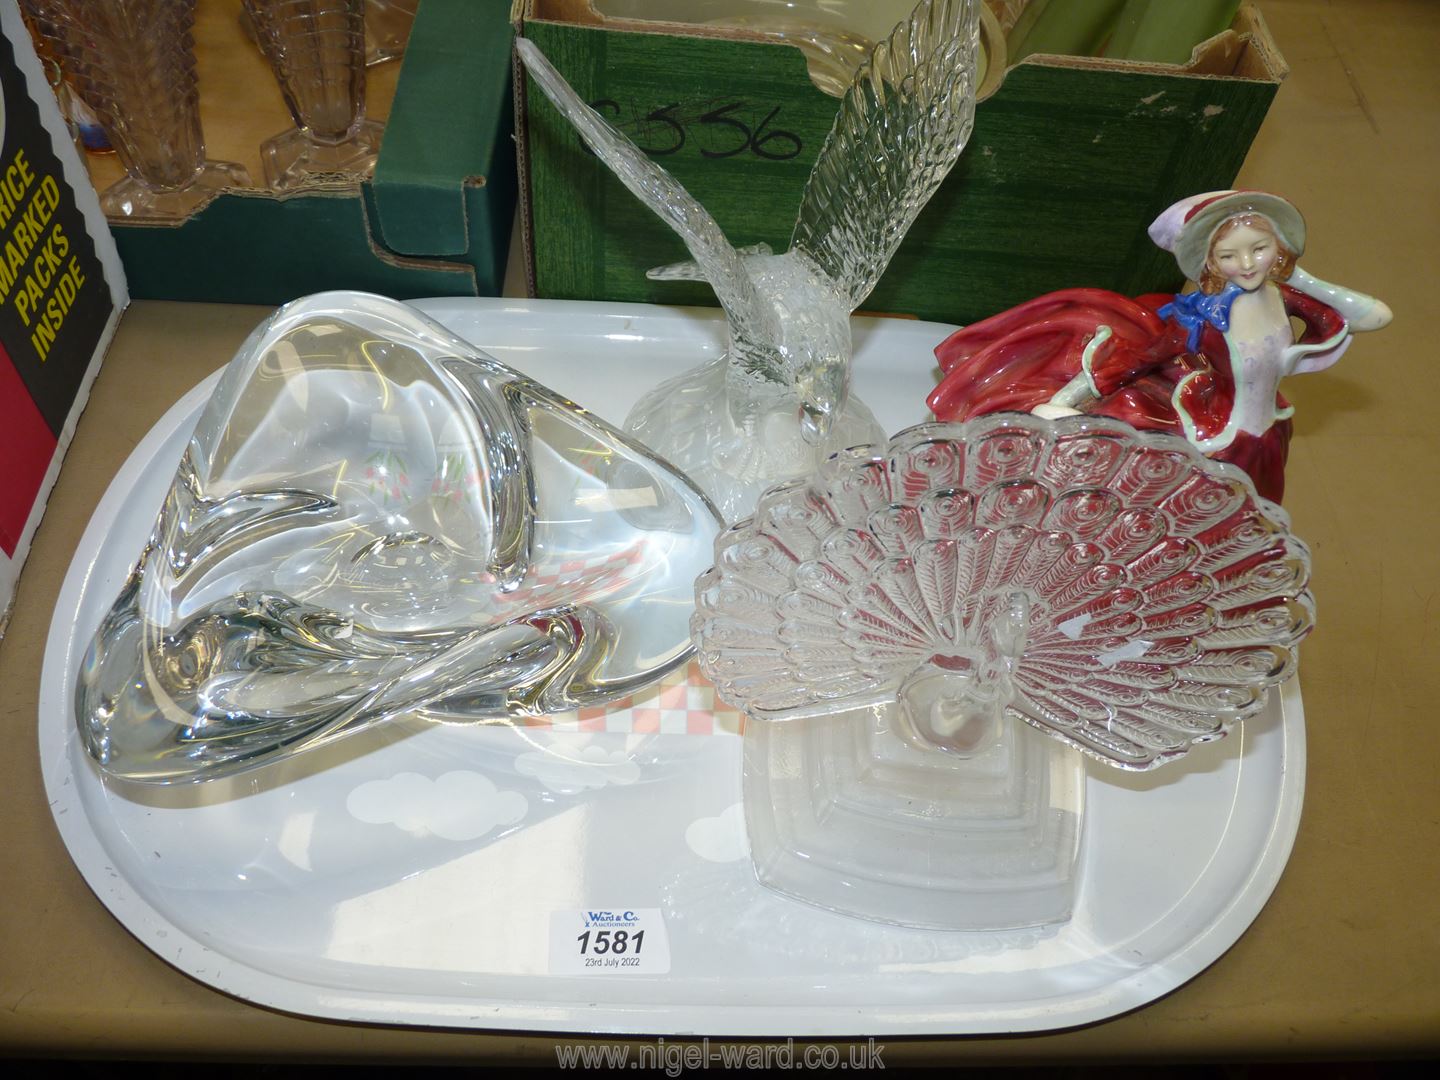 A glass Eagle by Cristal d'Arque, a glass Peacock and a glass bowl inscribed R.M.B.